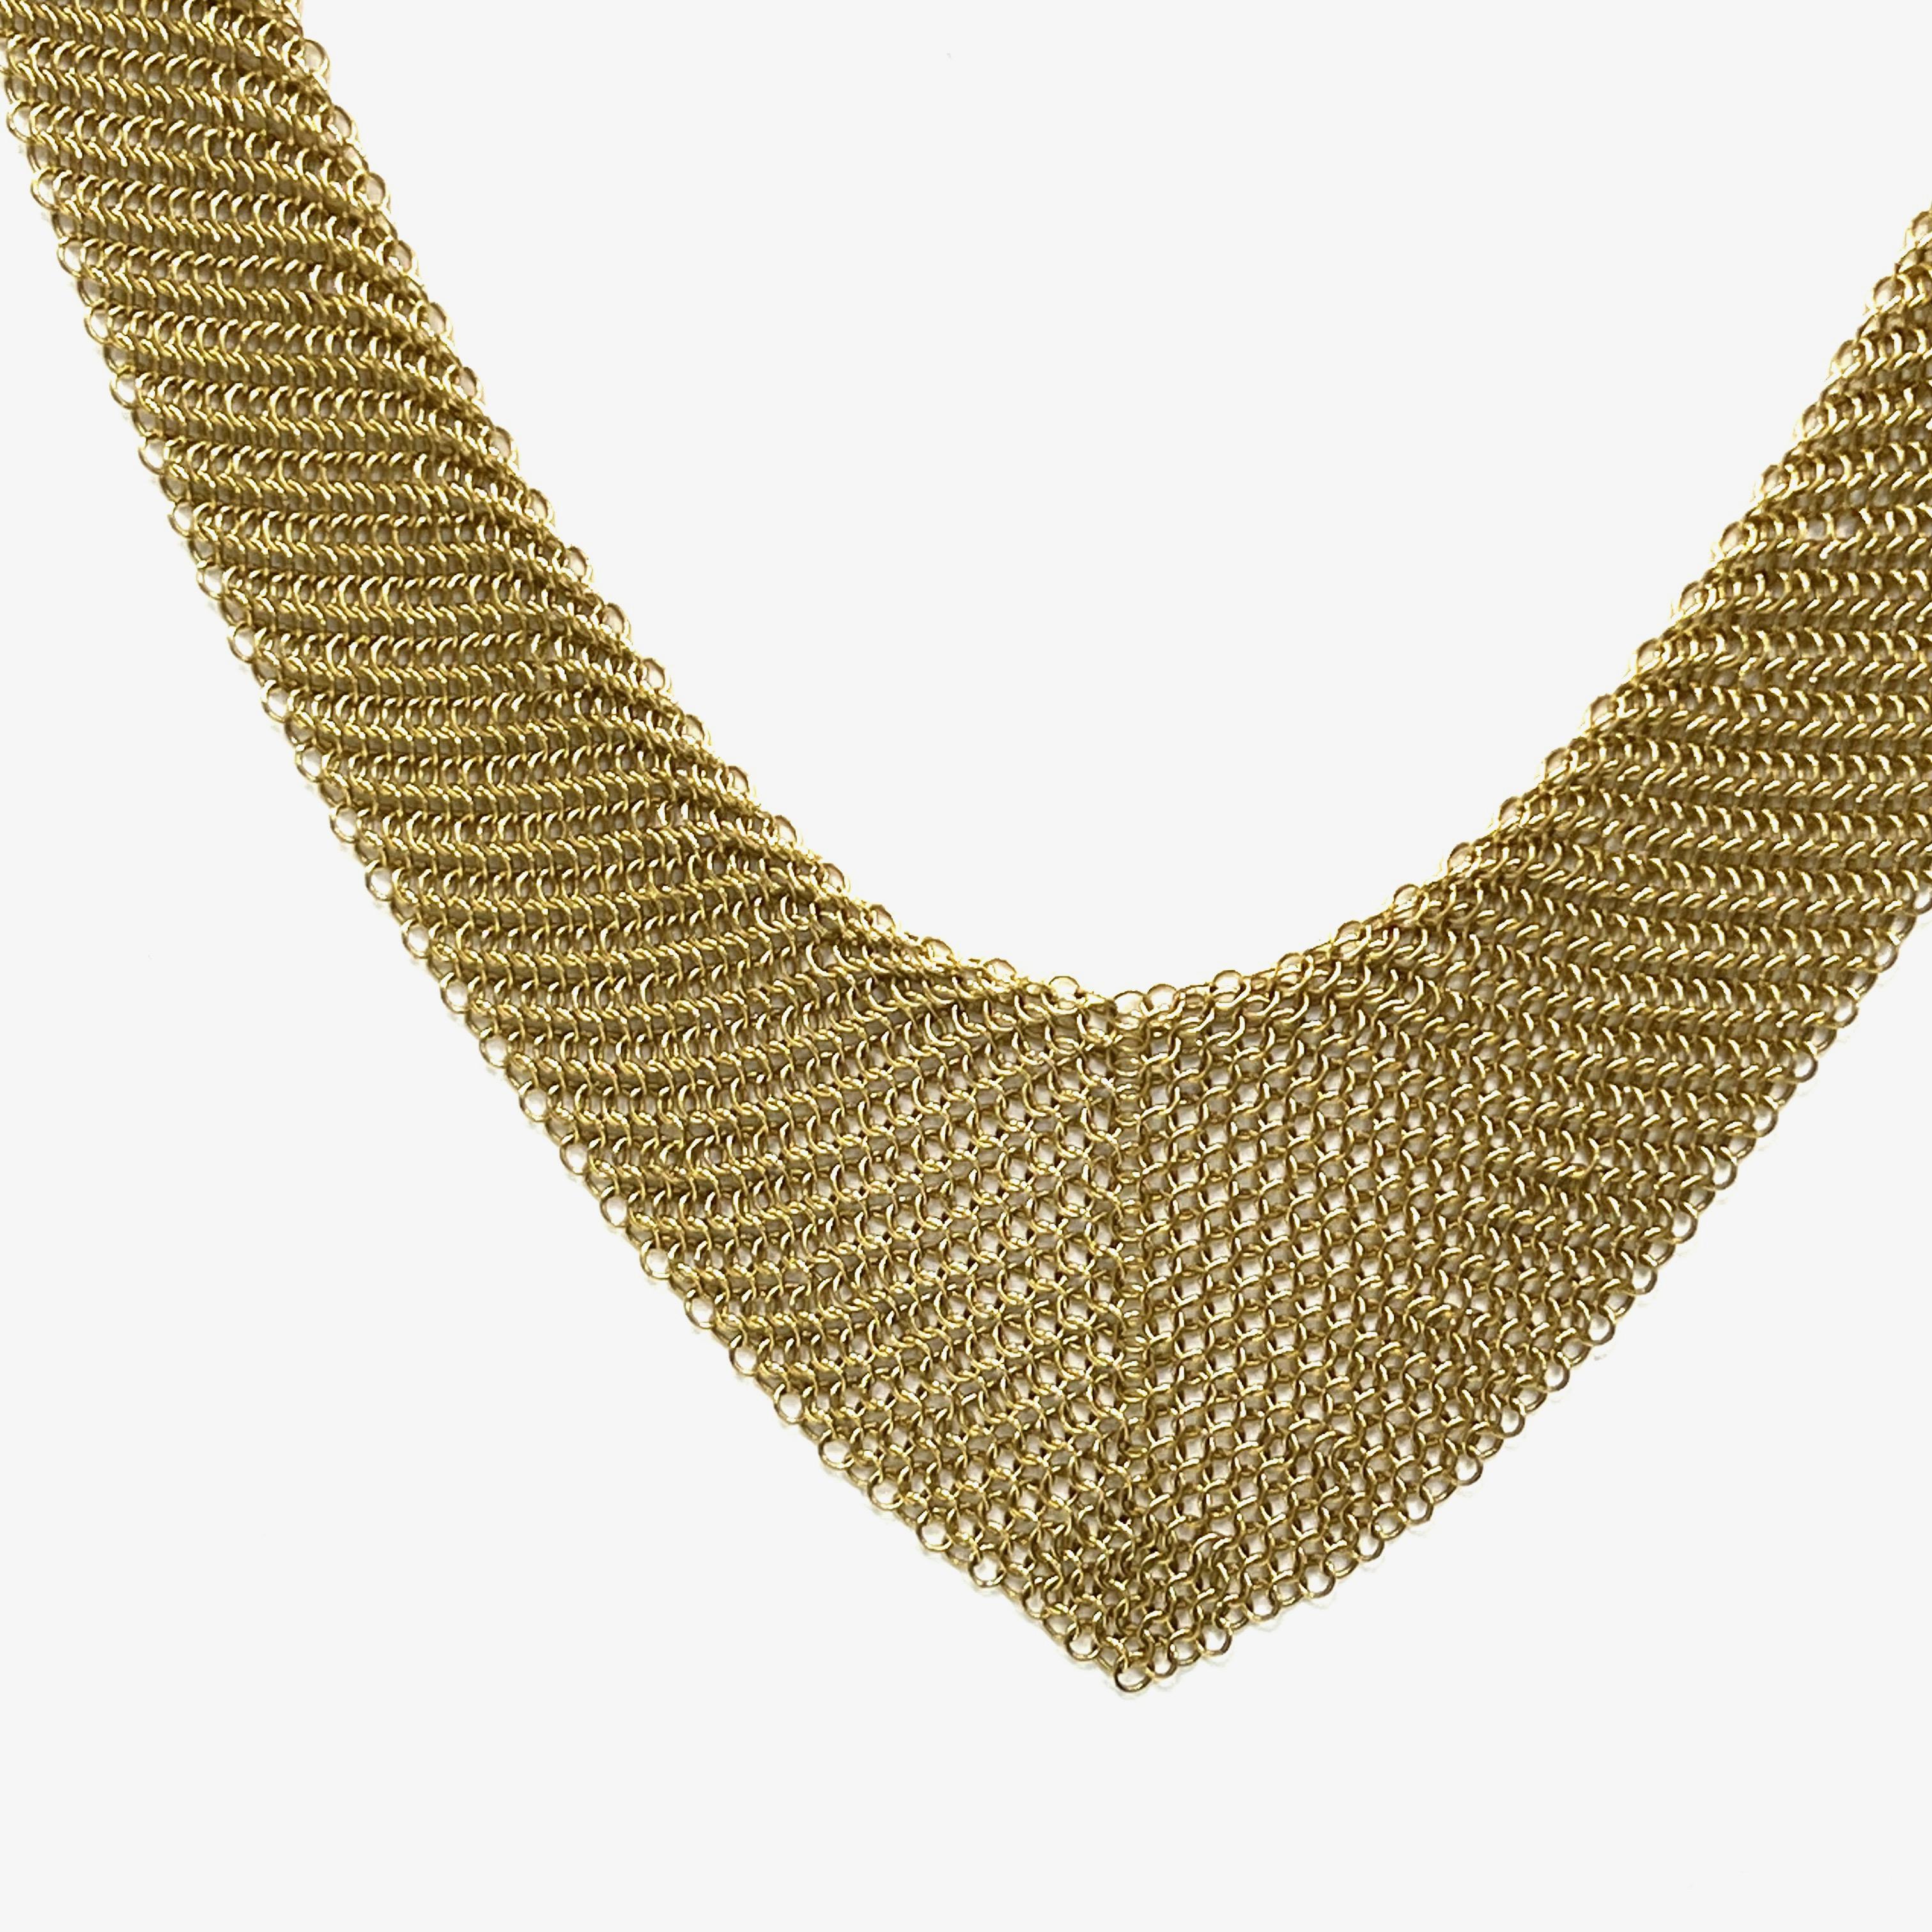 Elsa Peretti for Tiffany & Co. gold mesh long necklace

18 karat yellow gold; marked Tiffany & Co., 18k, Peretti

Size: width 1.75 inches (thickest part), length 26.5 inches
Total weight: 55.8 grams